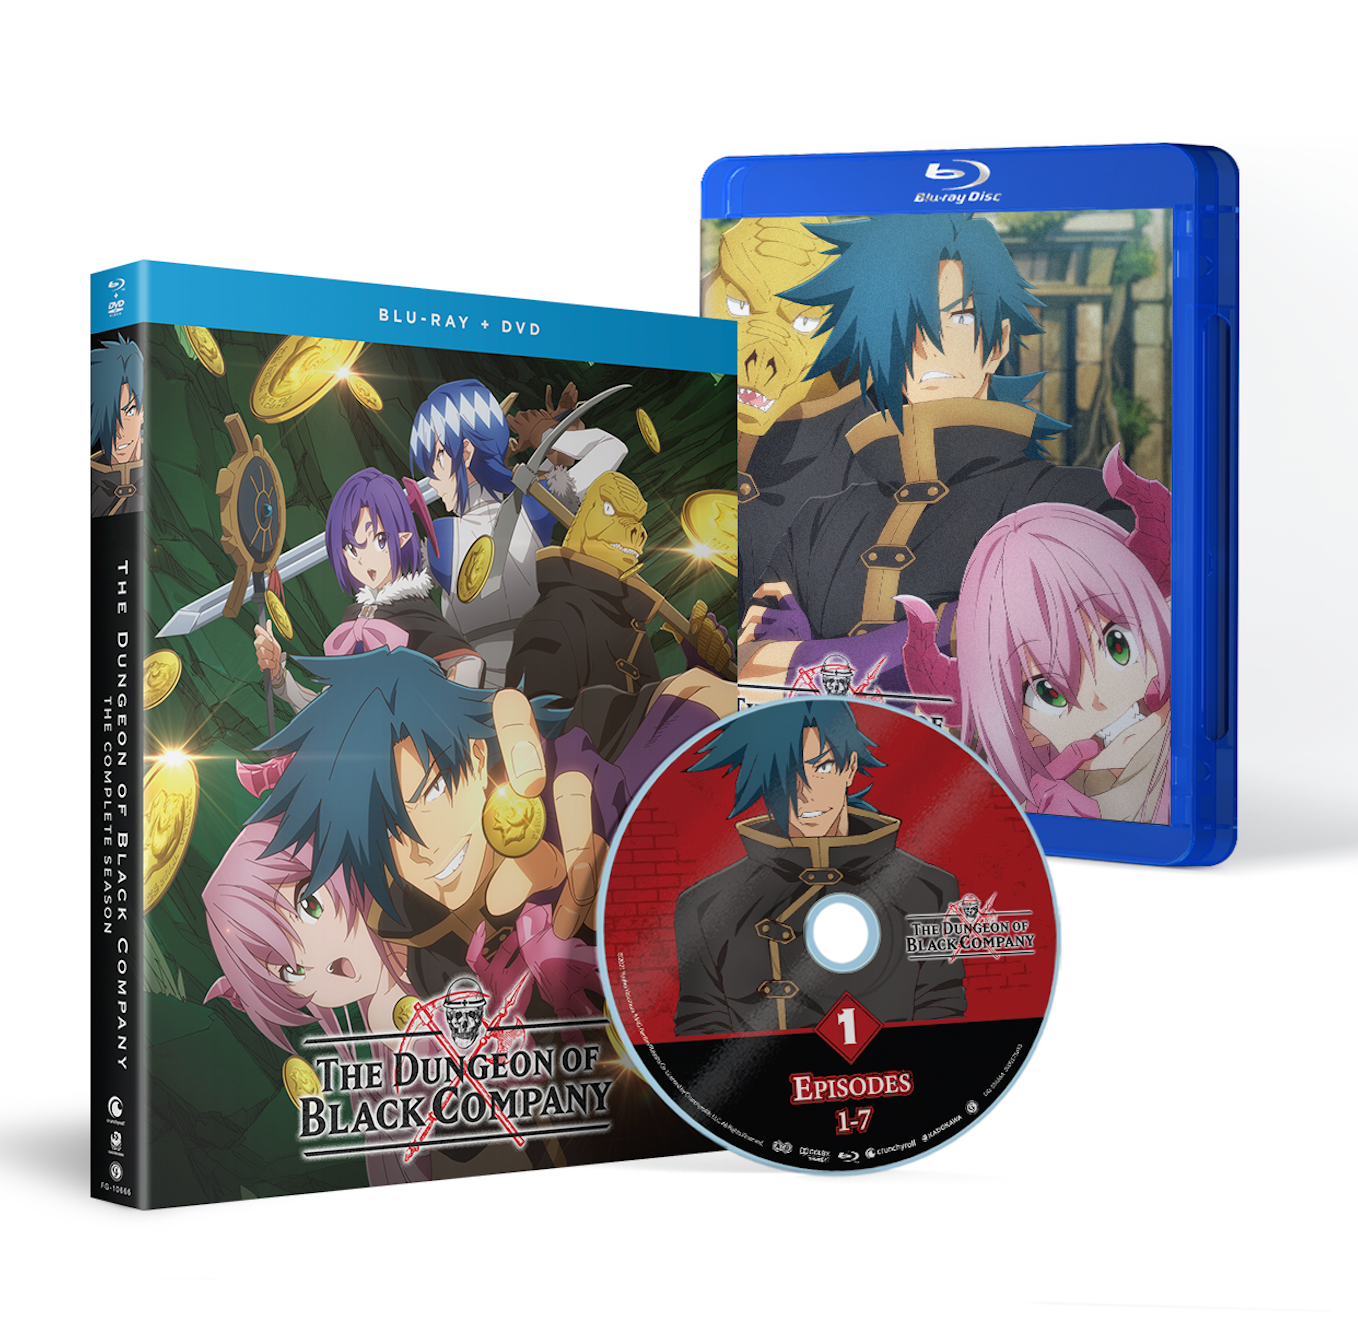 The Dungeon of Black Company - The Complete Season - BD/DVD image count 0